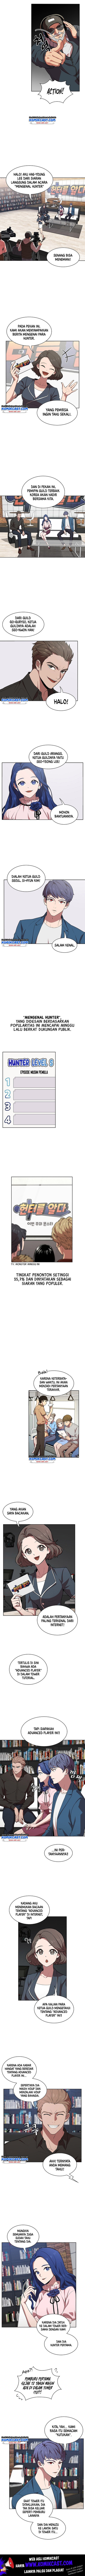 Spoiler Manhwa The Tutorial Tower of the Advanced Player 2